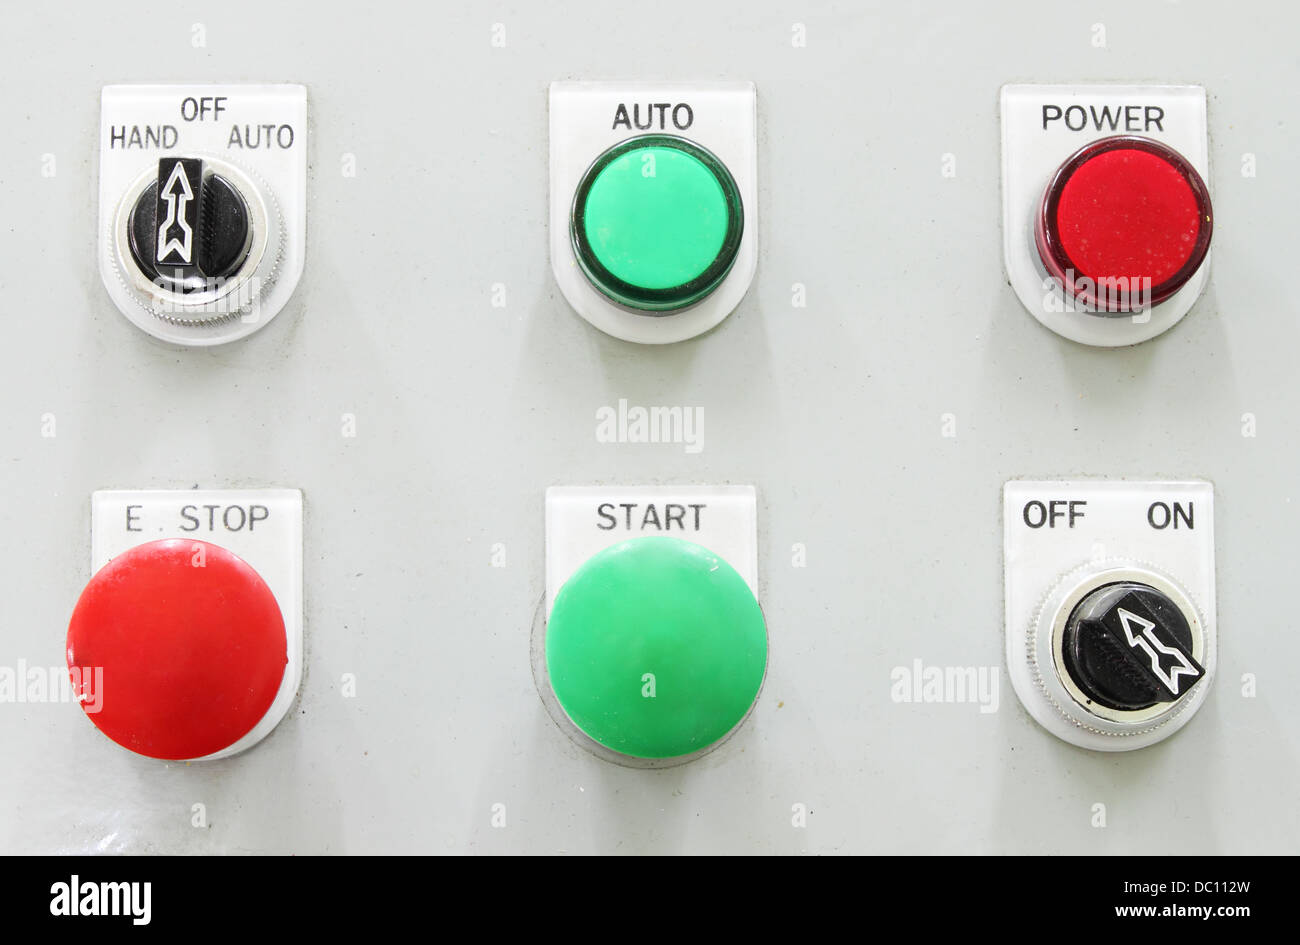 industrial switching button control panel Stock Photo - Alamy